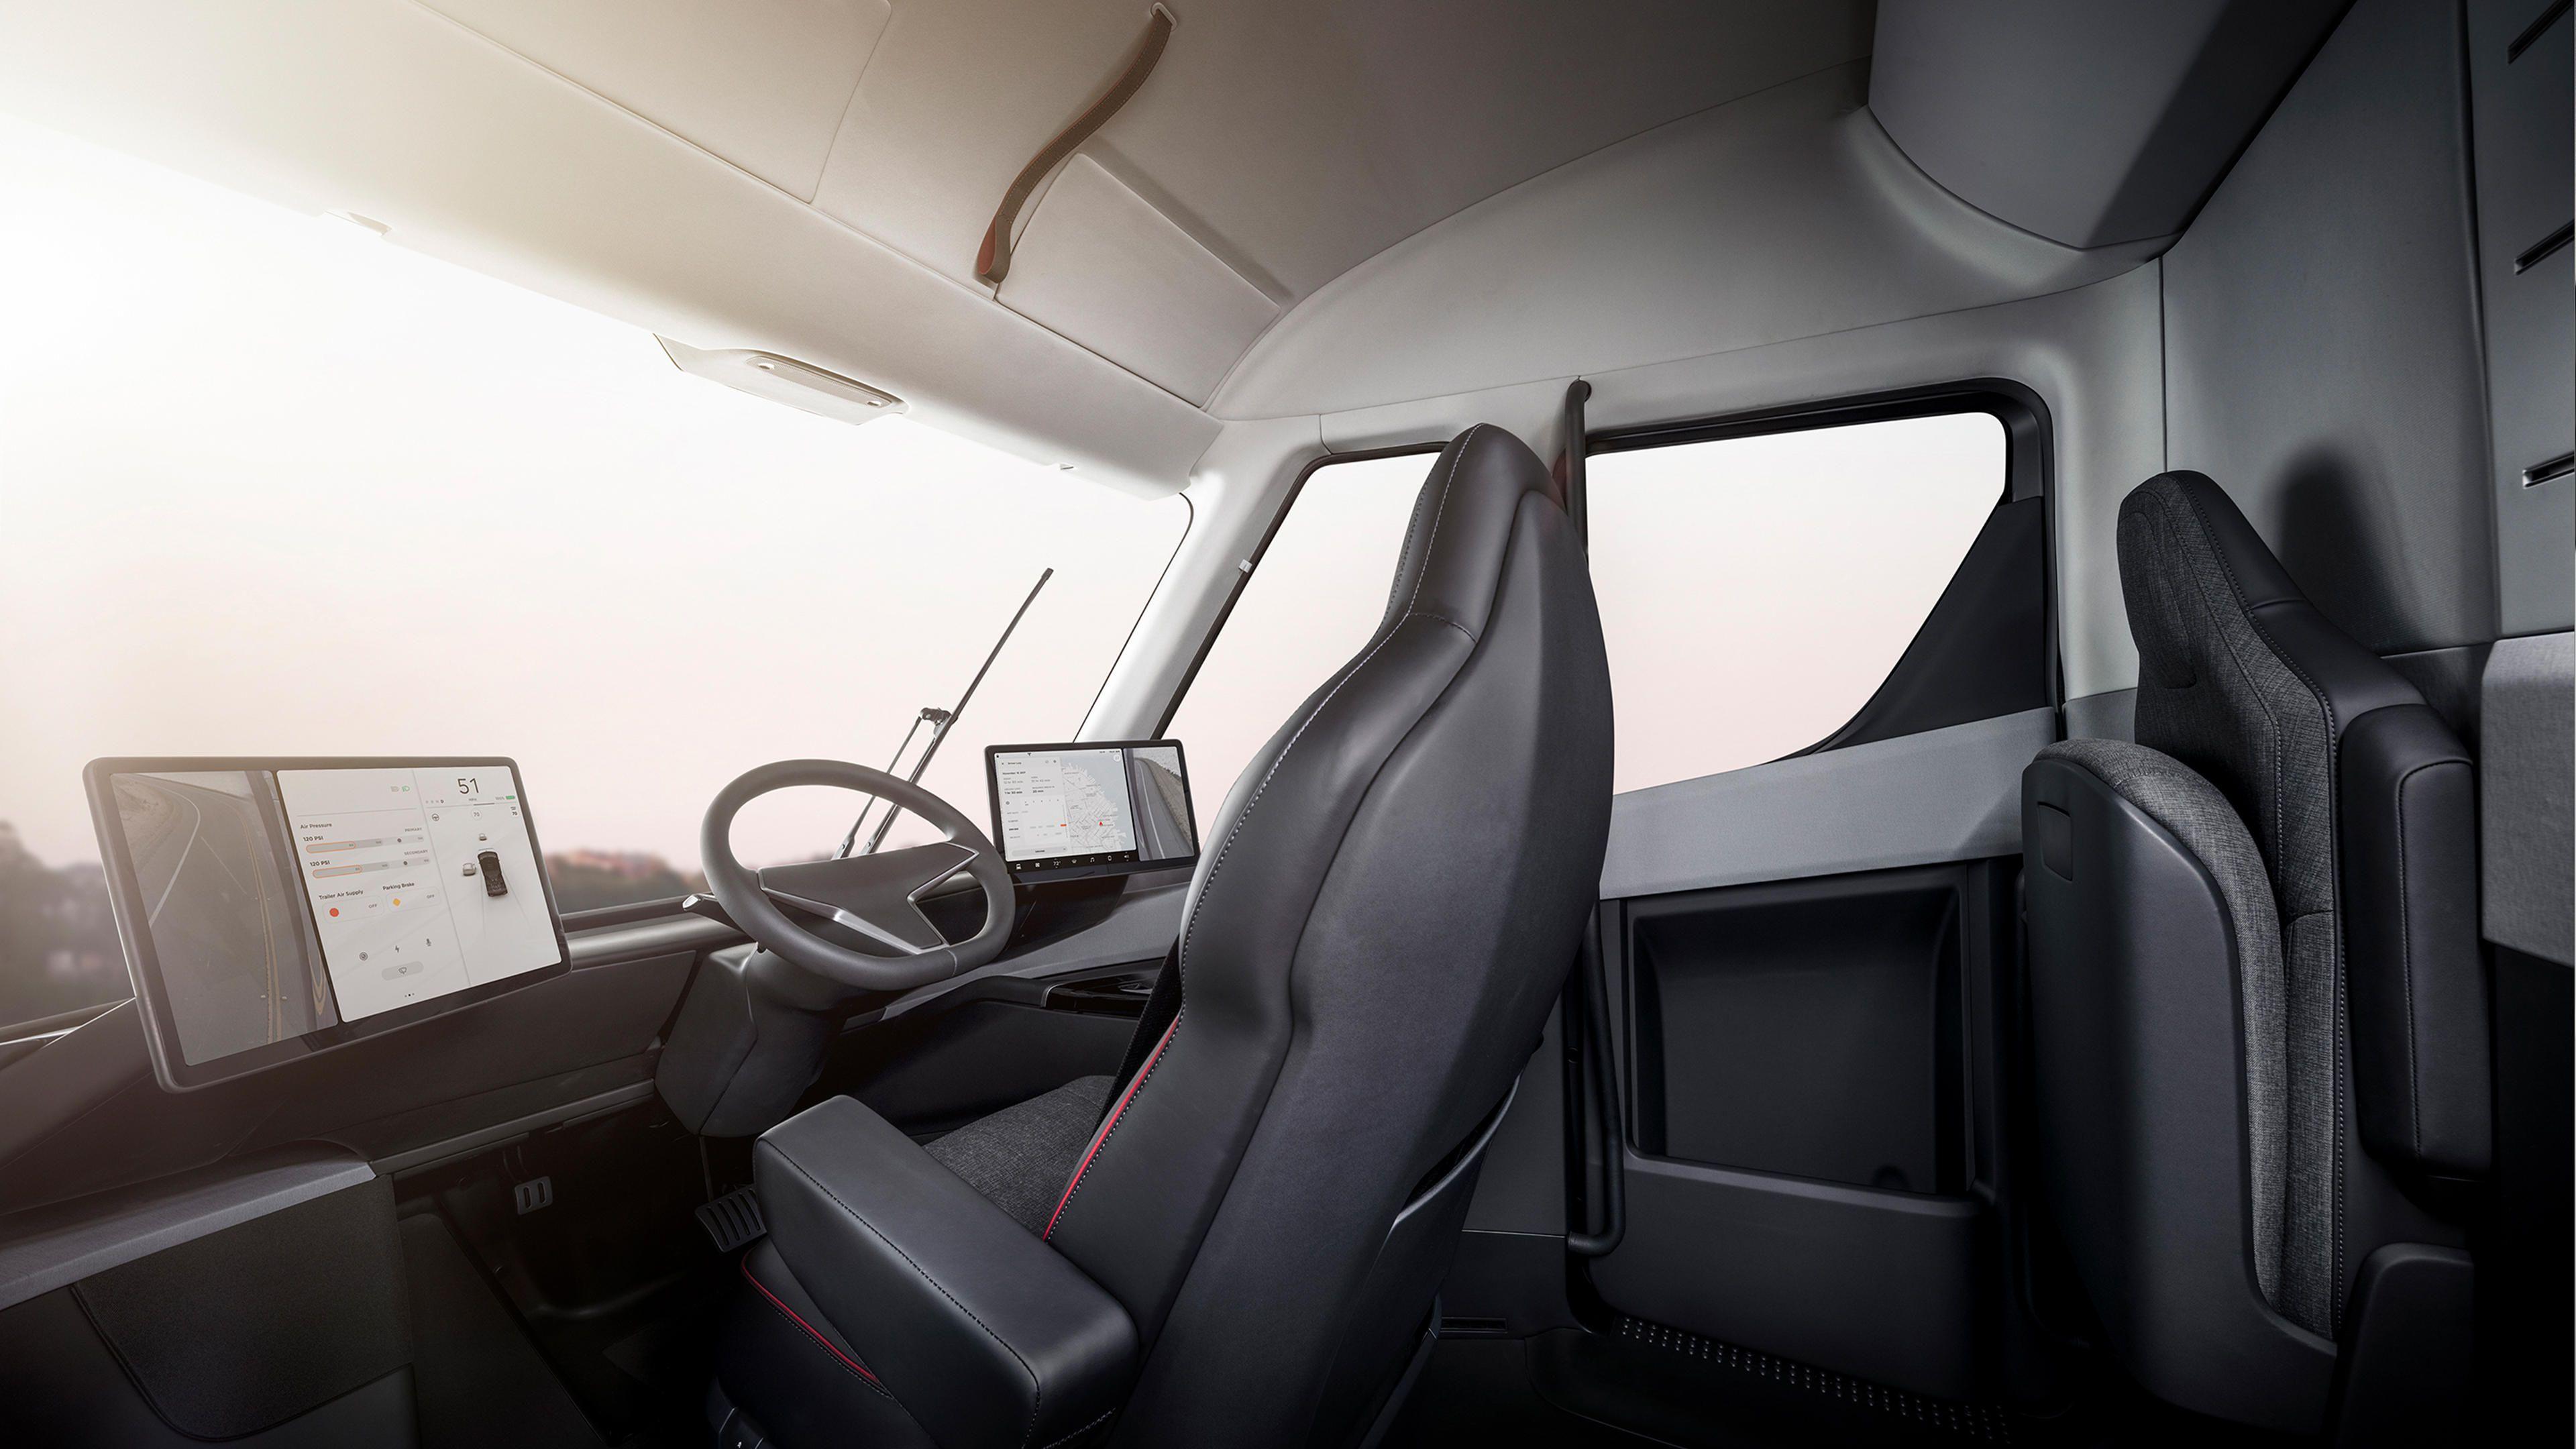 Tesla Semi truck stands to shake up trucking industry